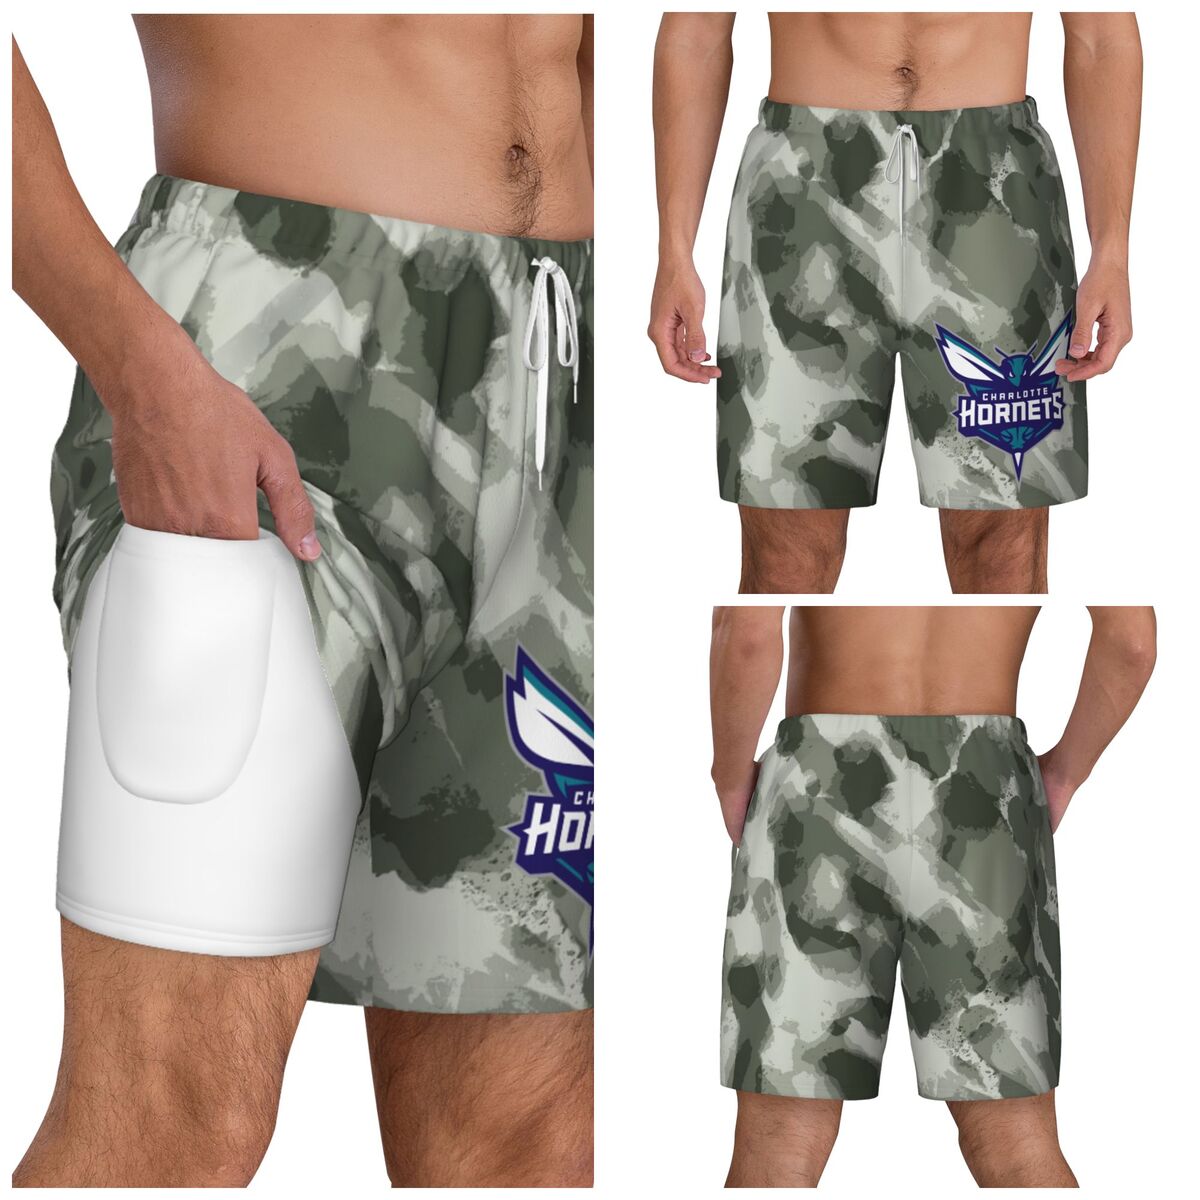 Charlotte Hornets Camo Men's Swim Trunks with Compression Liner